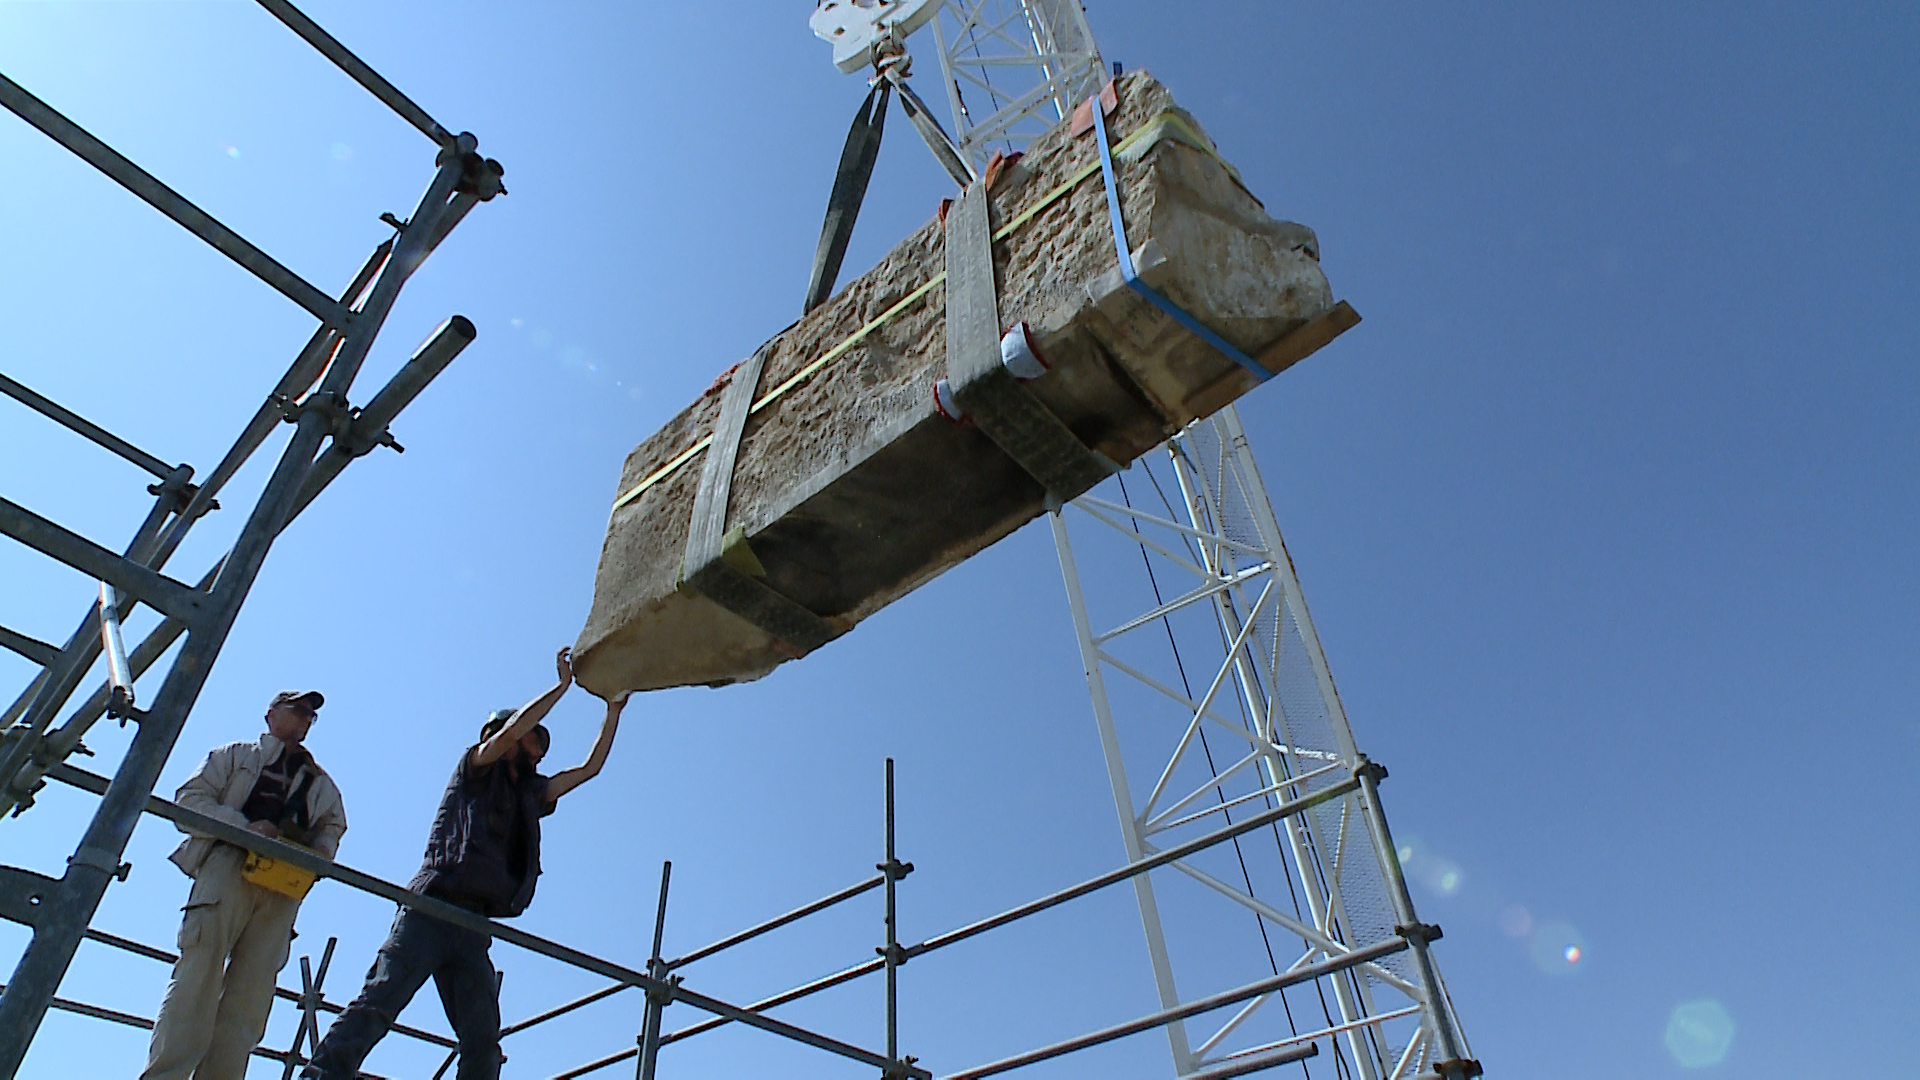 THE RESTORATION OF THE ACROPOLIS MONUMENTS. Snapshots from the project (2011-2013)